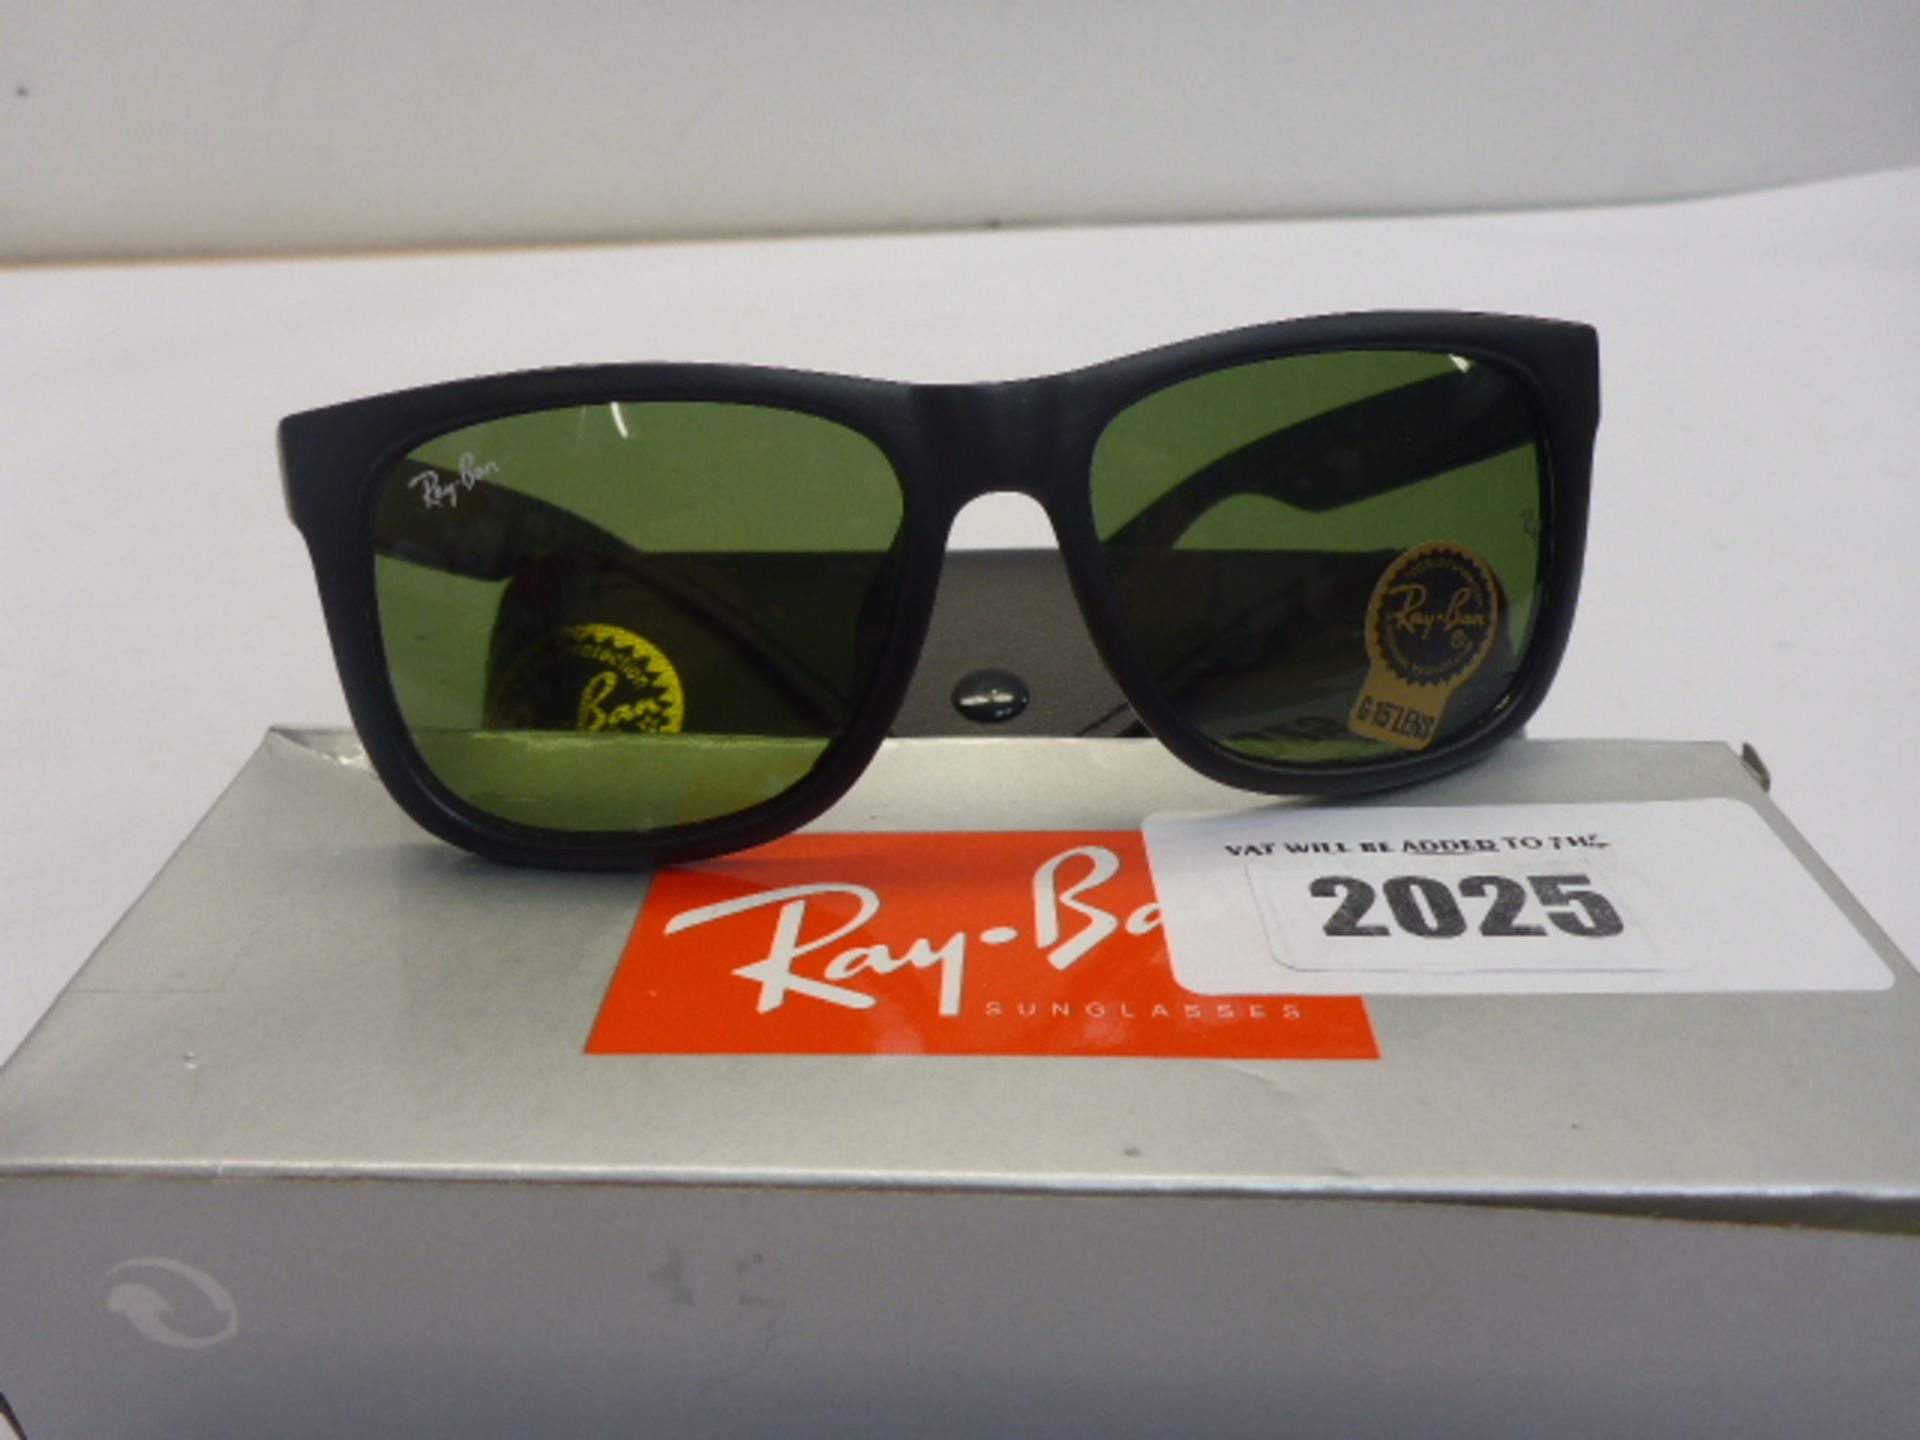 Ray-Ban 4165 Justin sunglasses in case and box